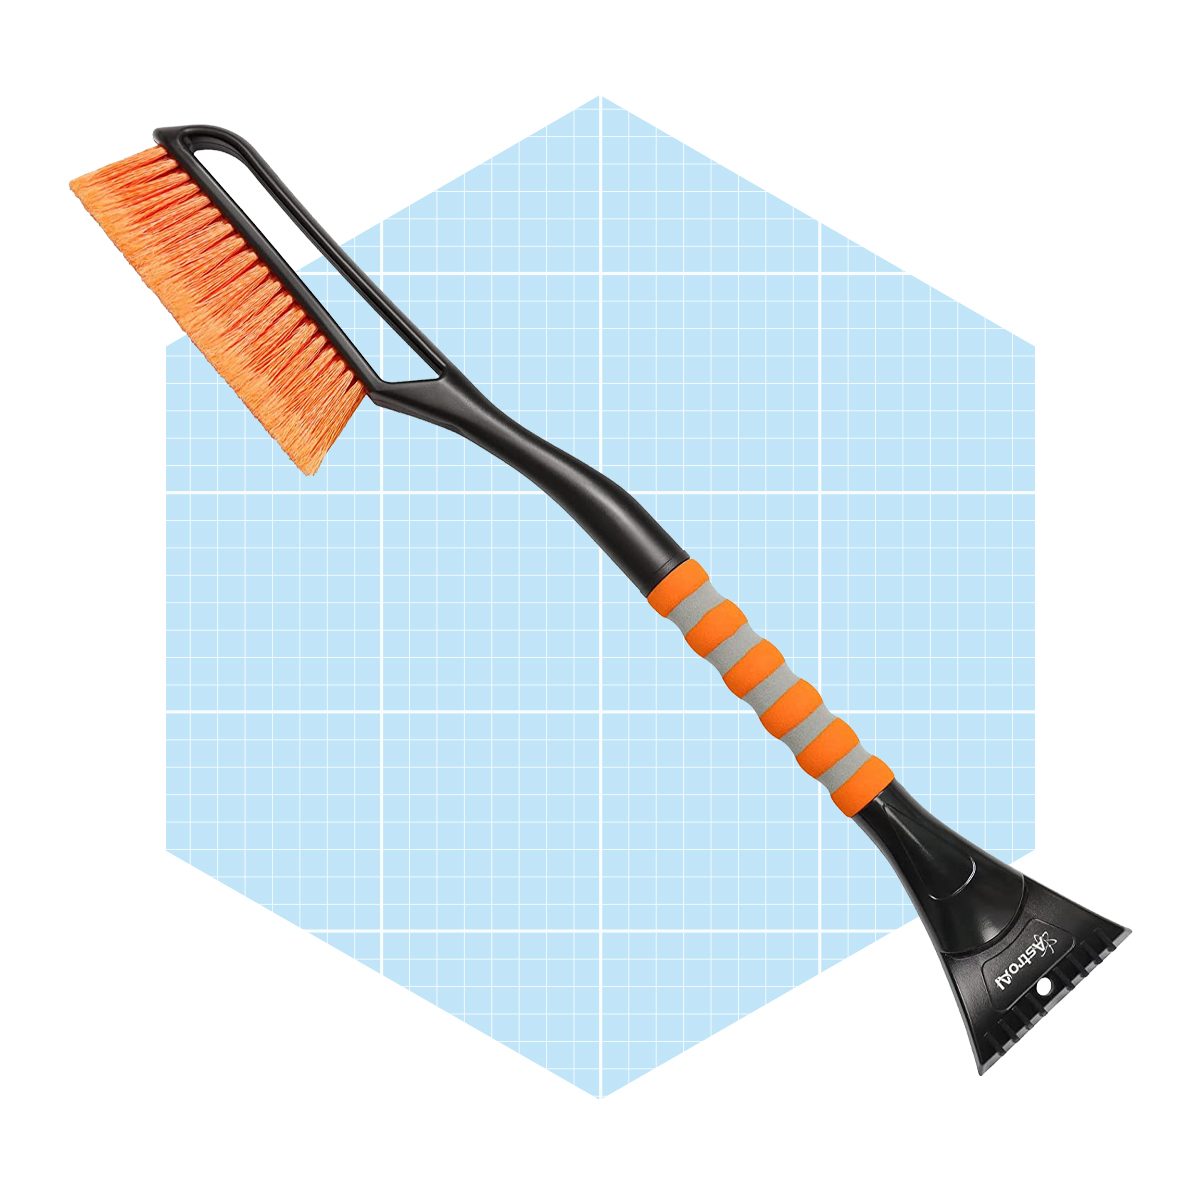 Snow Ice Scraper Snow Brush Shovel Removal Brush Car Vehicle for the Car  Windshield Cleaning Scraping